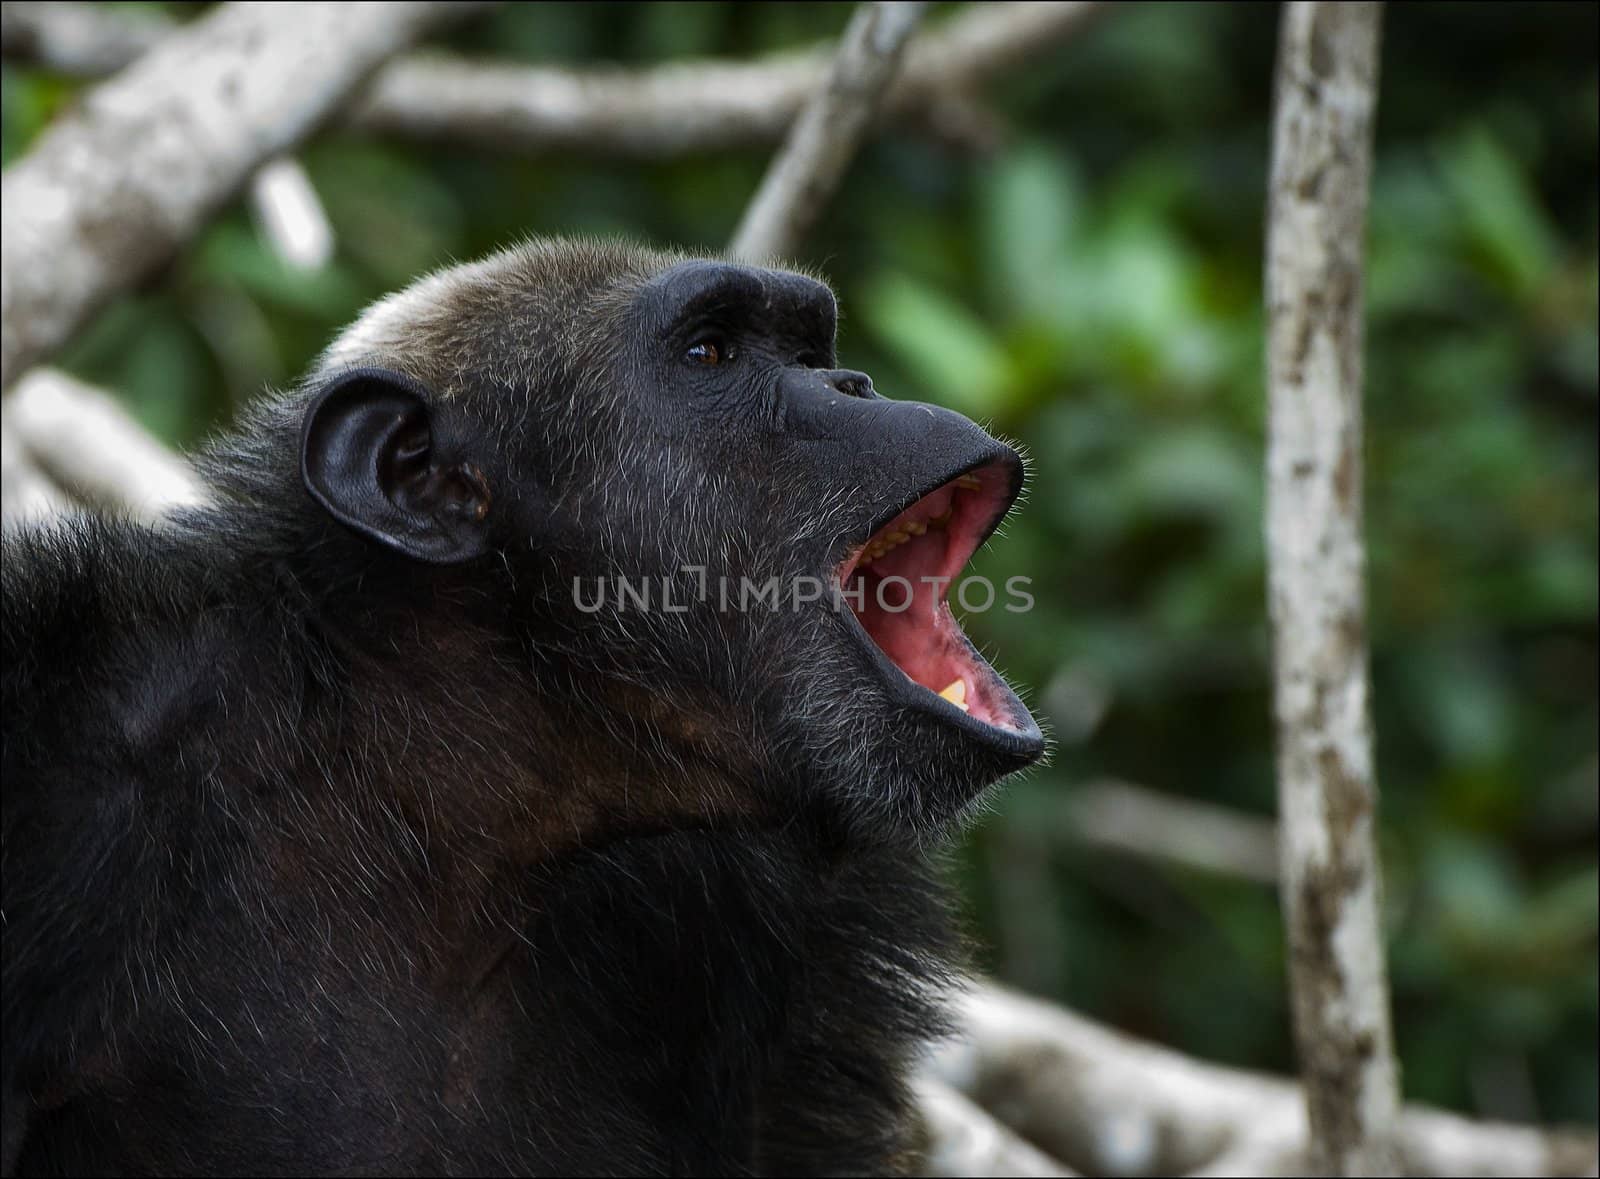 Shout. A chimpanzee in wood, widely opening a mouth, loudly shouts